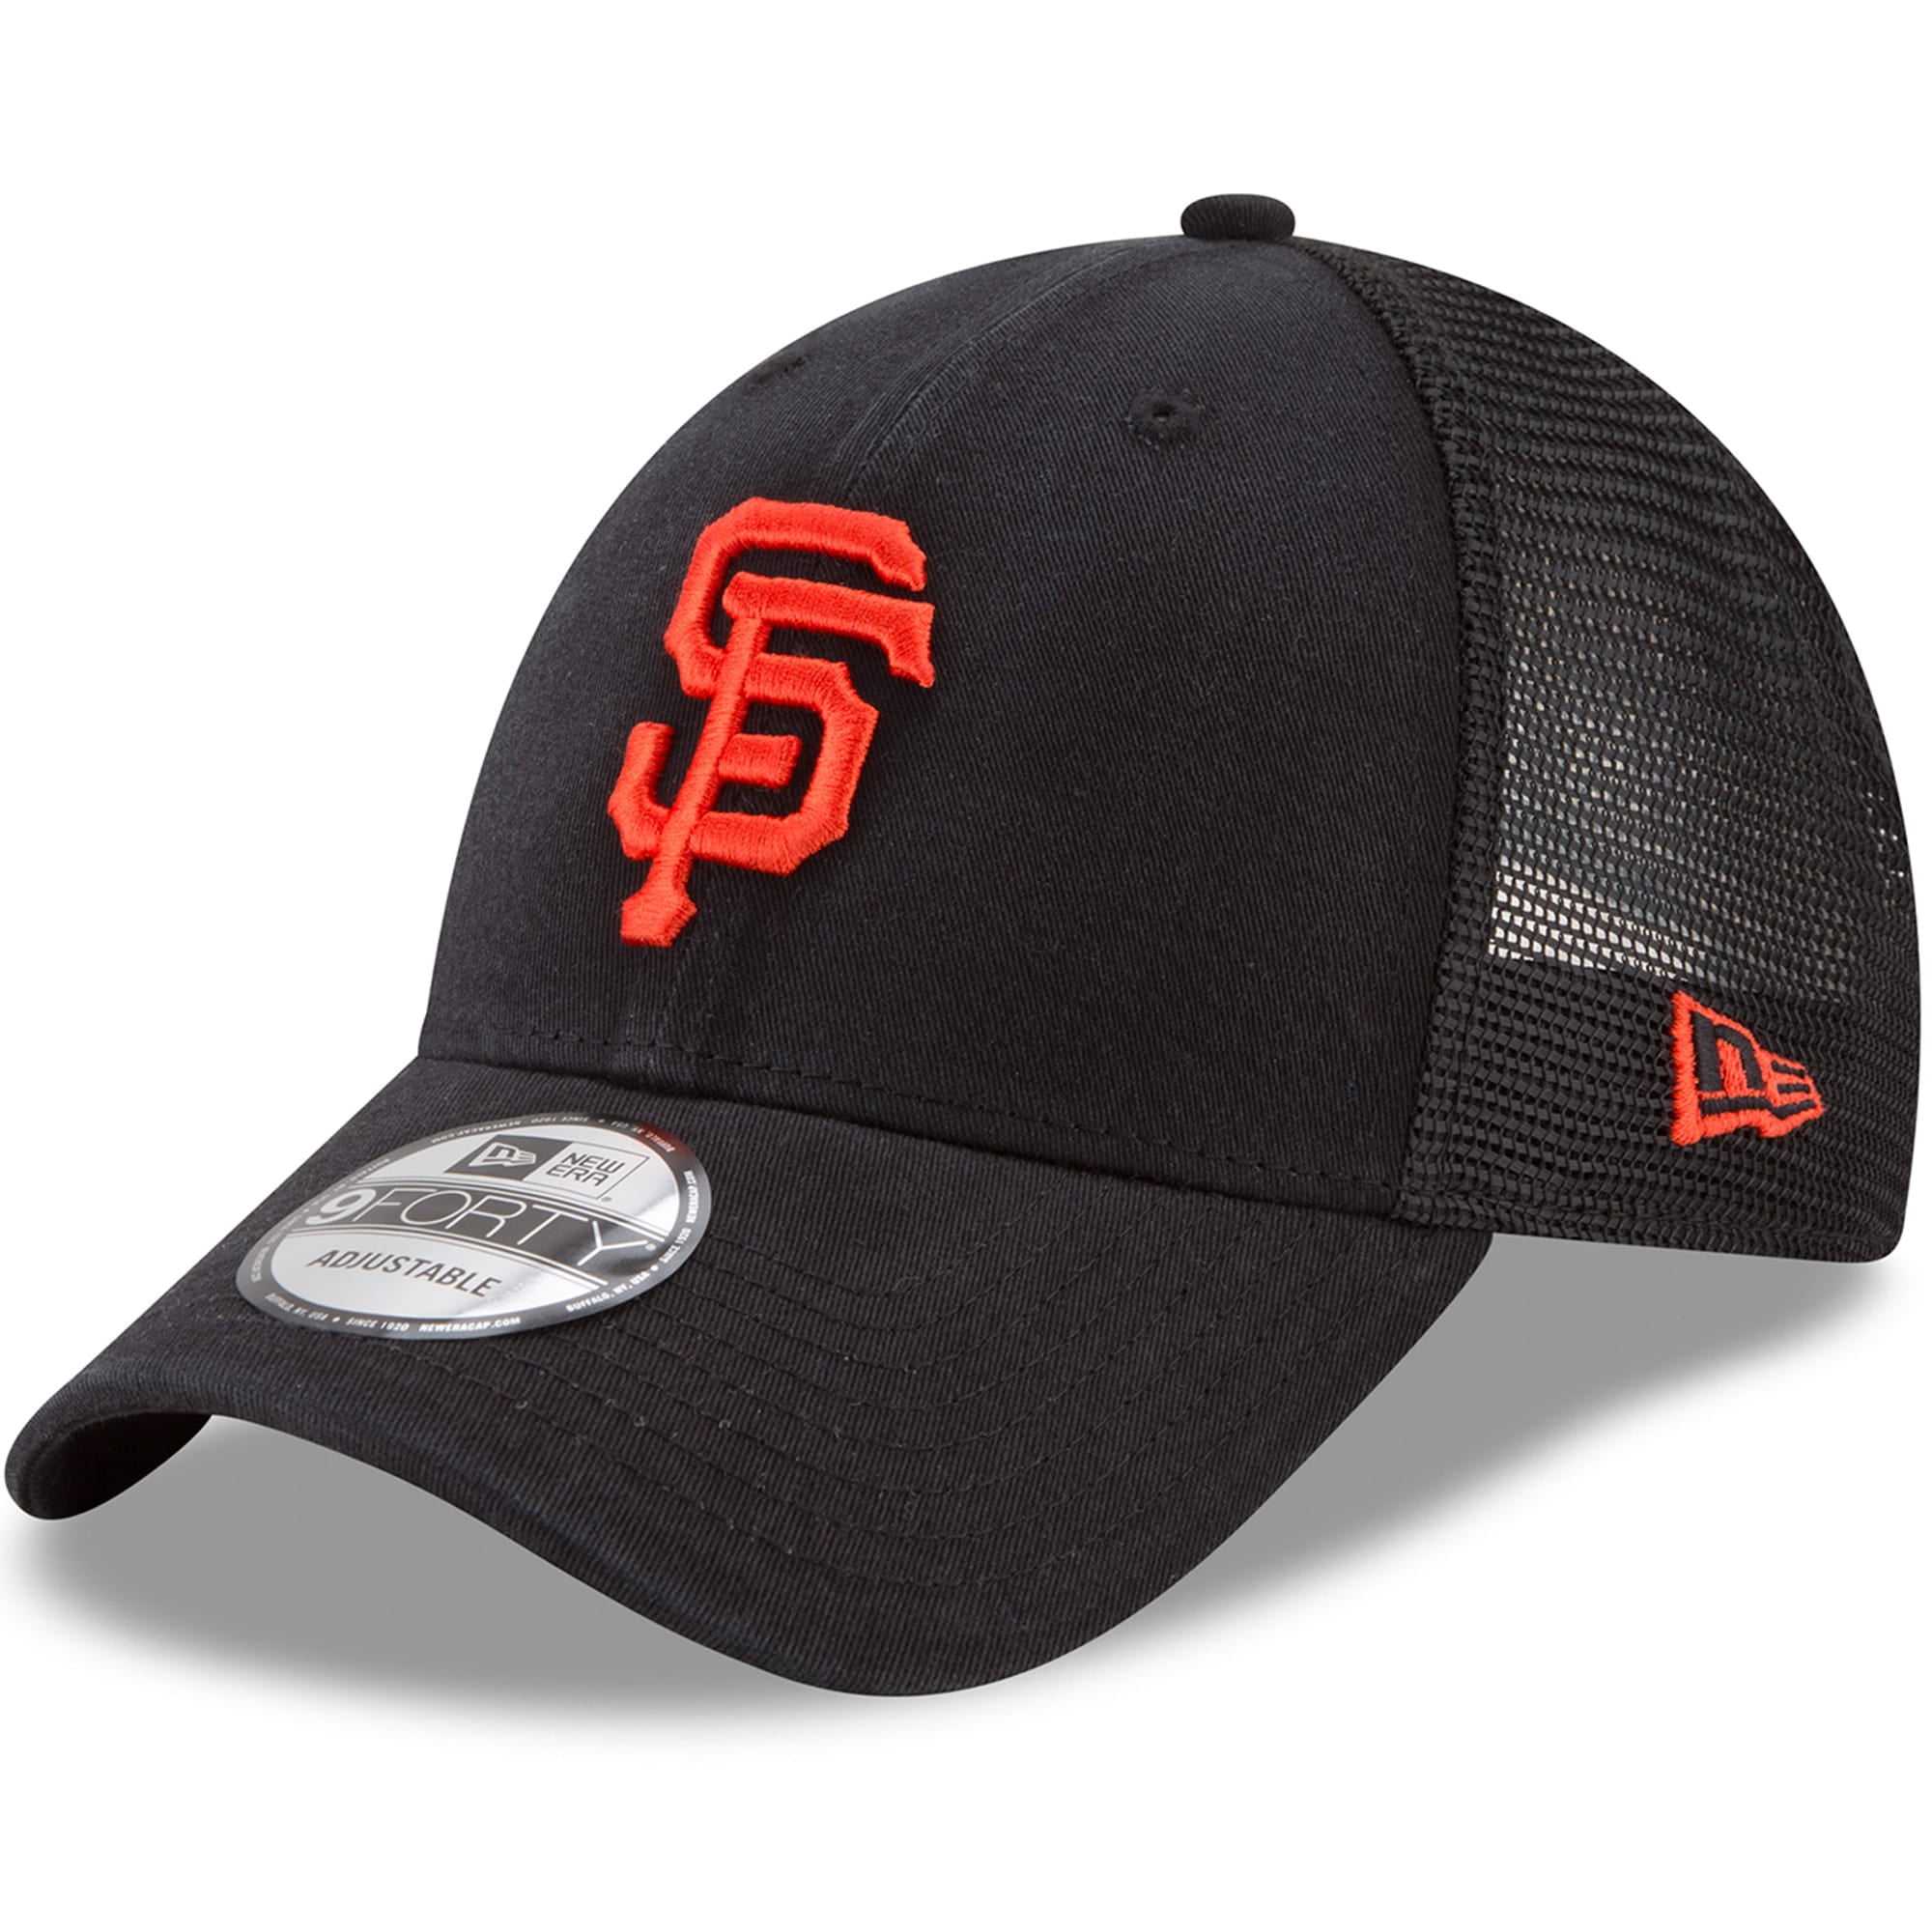 NEW ERA All sizes. 59FIFTY CAP MEDDLED SAN FRANCISCO GIANTS Fitted Black 